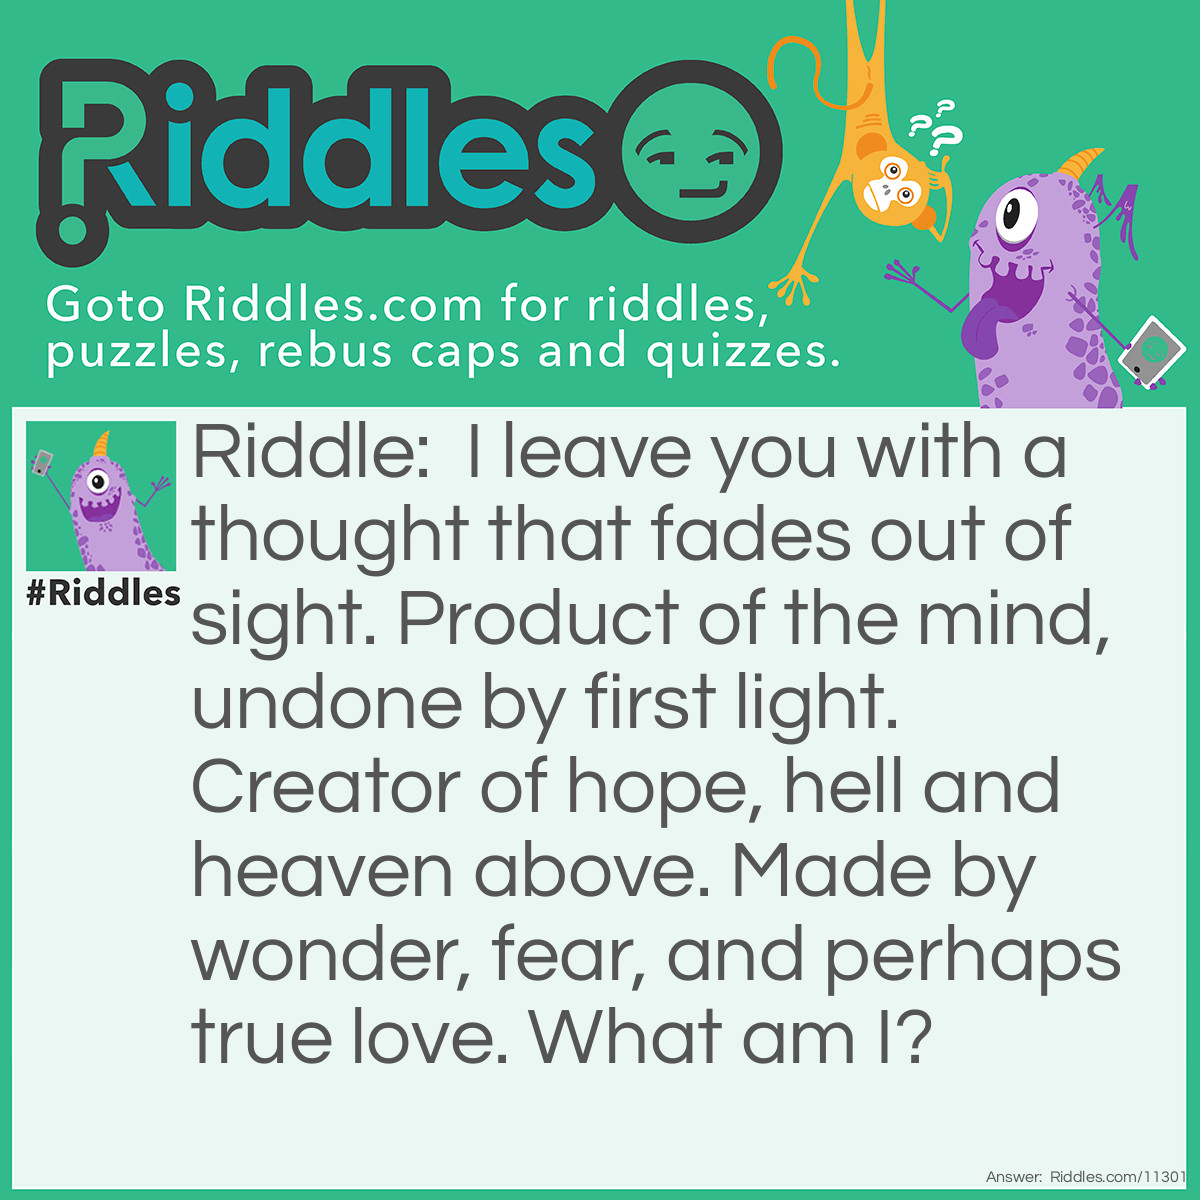 Riddle: I leave you with a thought that fades out of sight. Product of the mind, undone by first light. Creator of hope, hell and heaven above. Made by wonder, fear, and perhaps true love. What am I? Answer: Dreams.